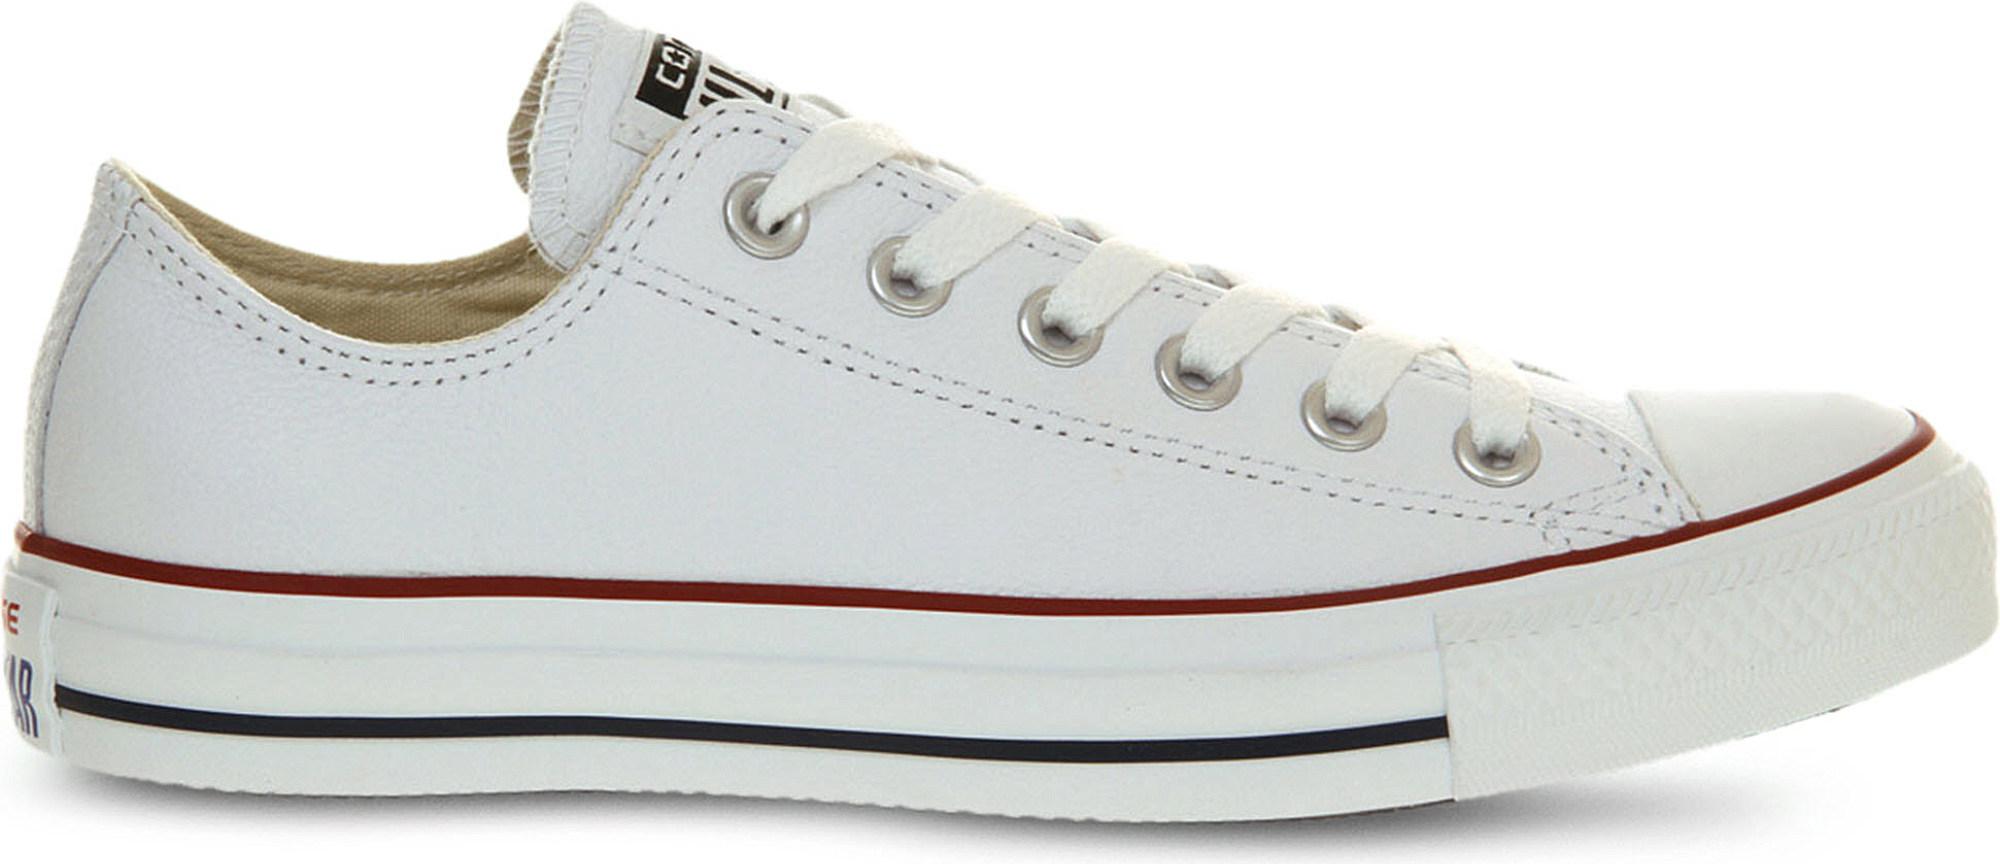 Lyst - Converse All Star Low-top Leather Trainers in White for Men - Save 3.07692307692308%